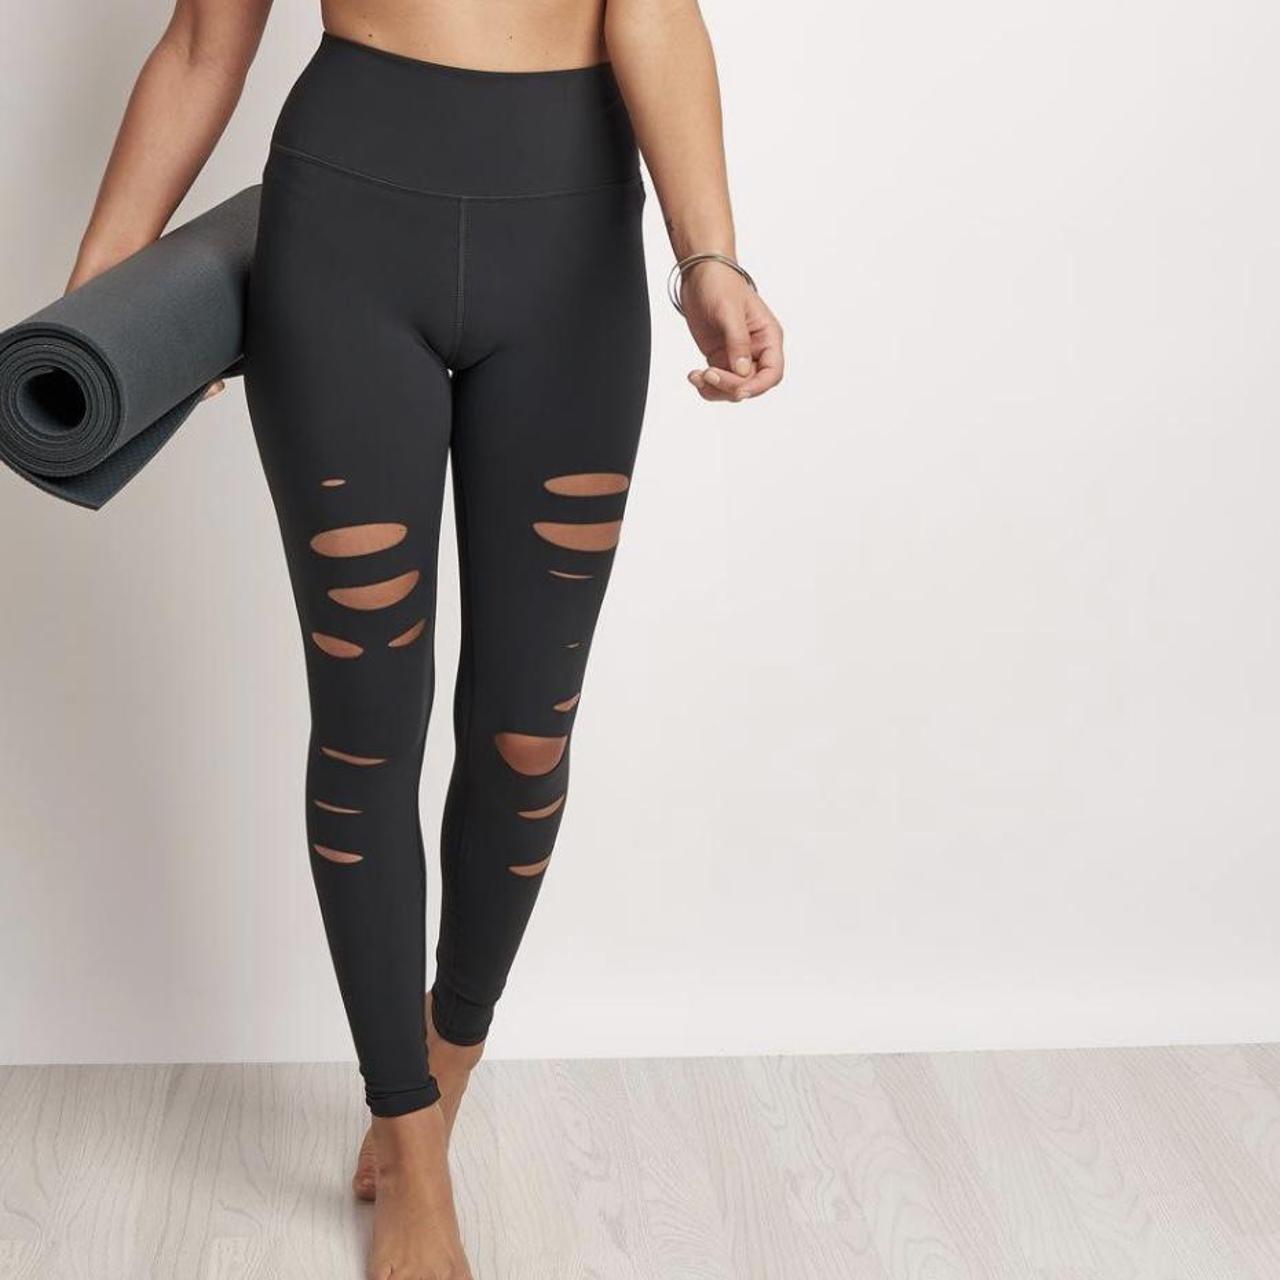 Alo yoga ripped warrior legging , One rip on right